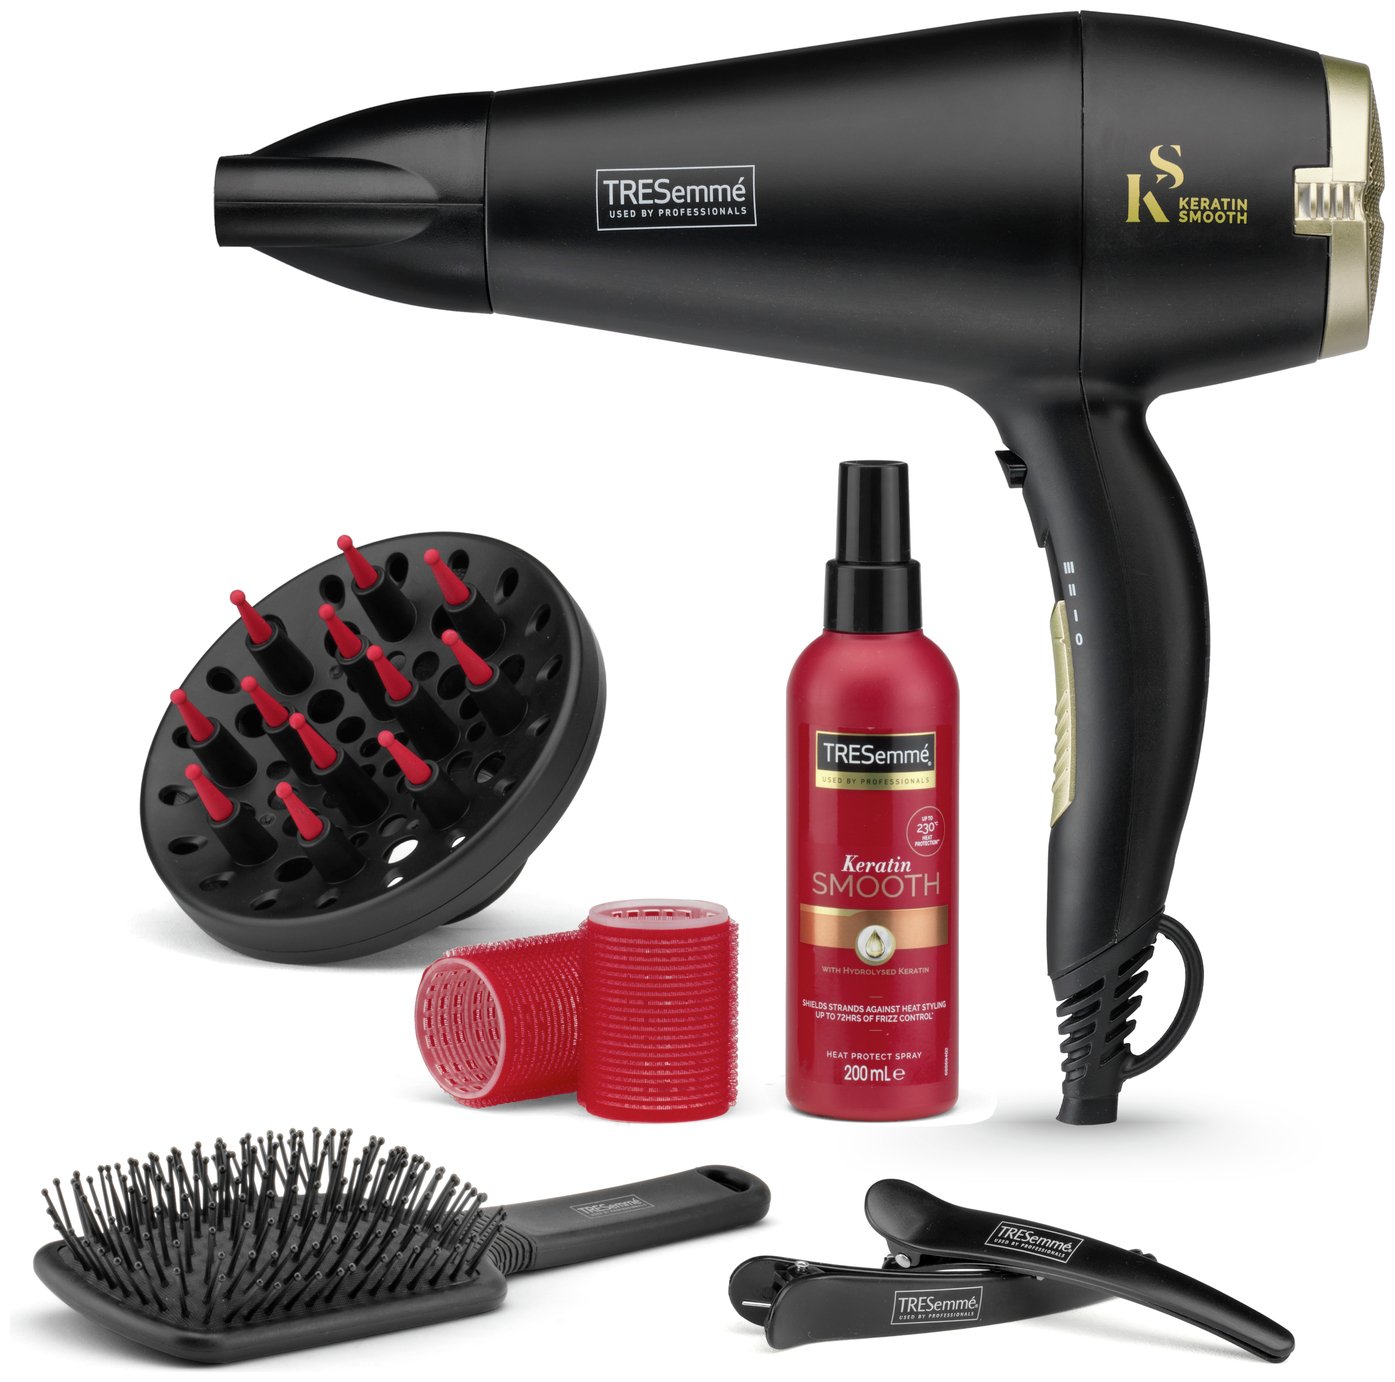 TRESemme Keratin Smooth Blow Dry Hair Dryer Gift Set 